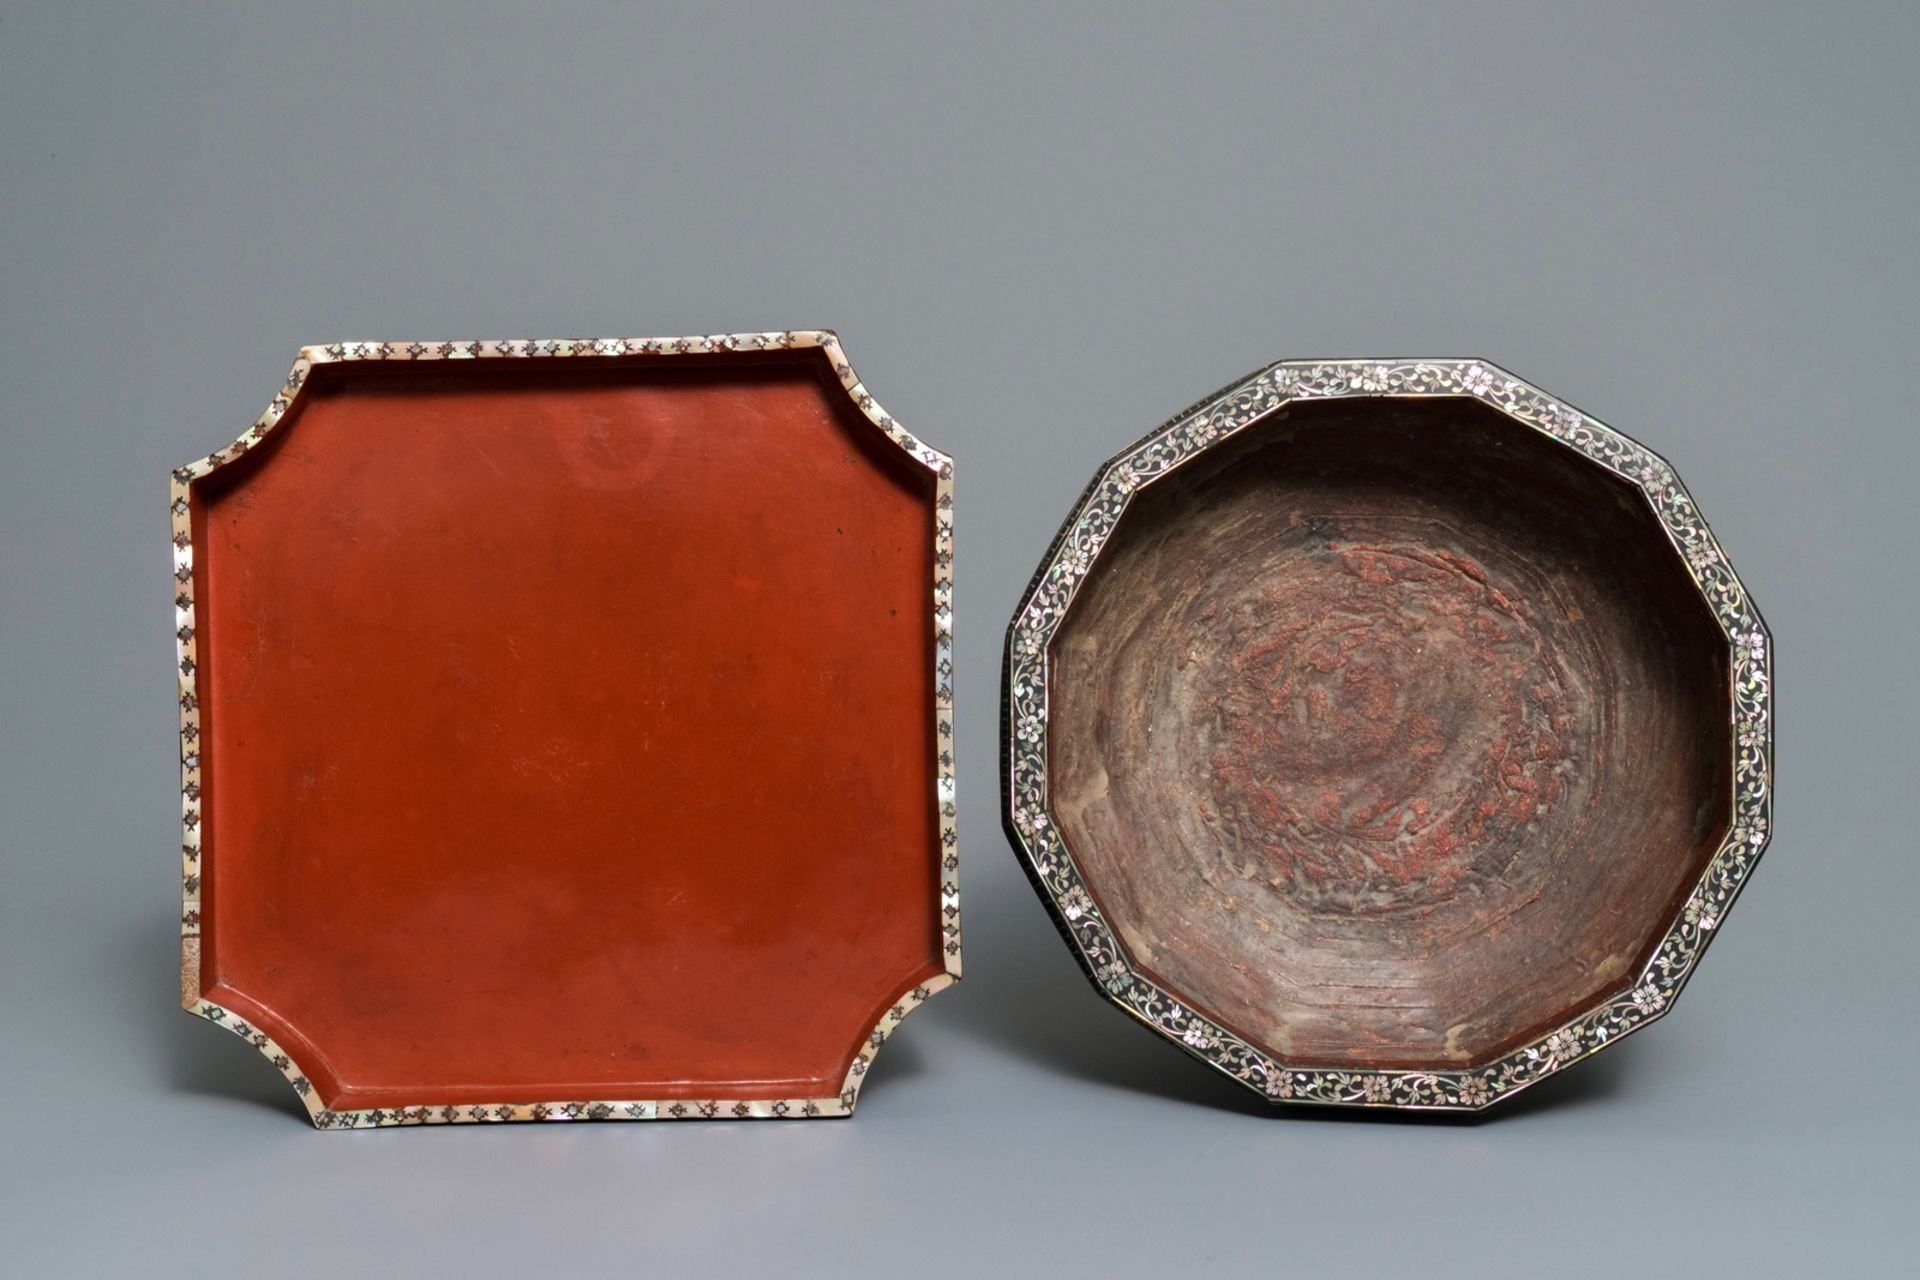 A varied collection of mother-of-pearl and mica-inlaid lacquerware, Southeast Asia, 19/20th C. - Image 4 of 10